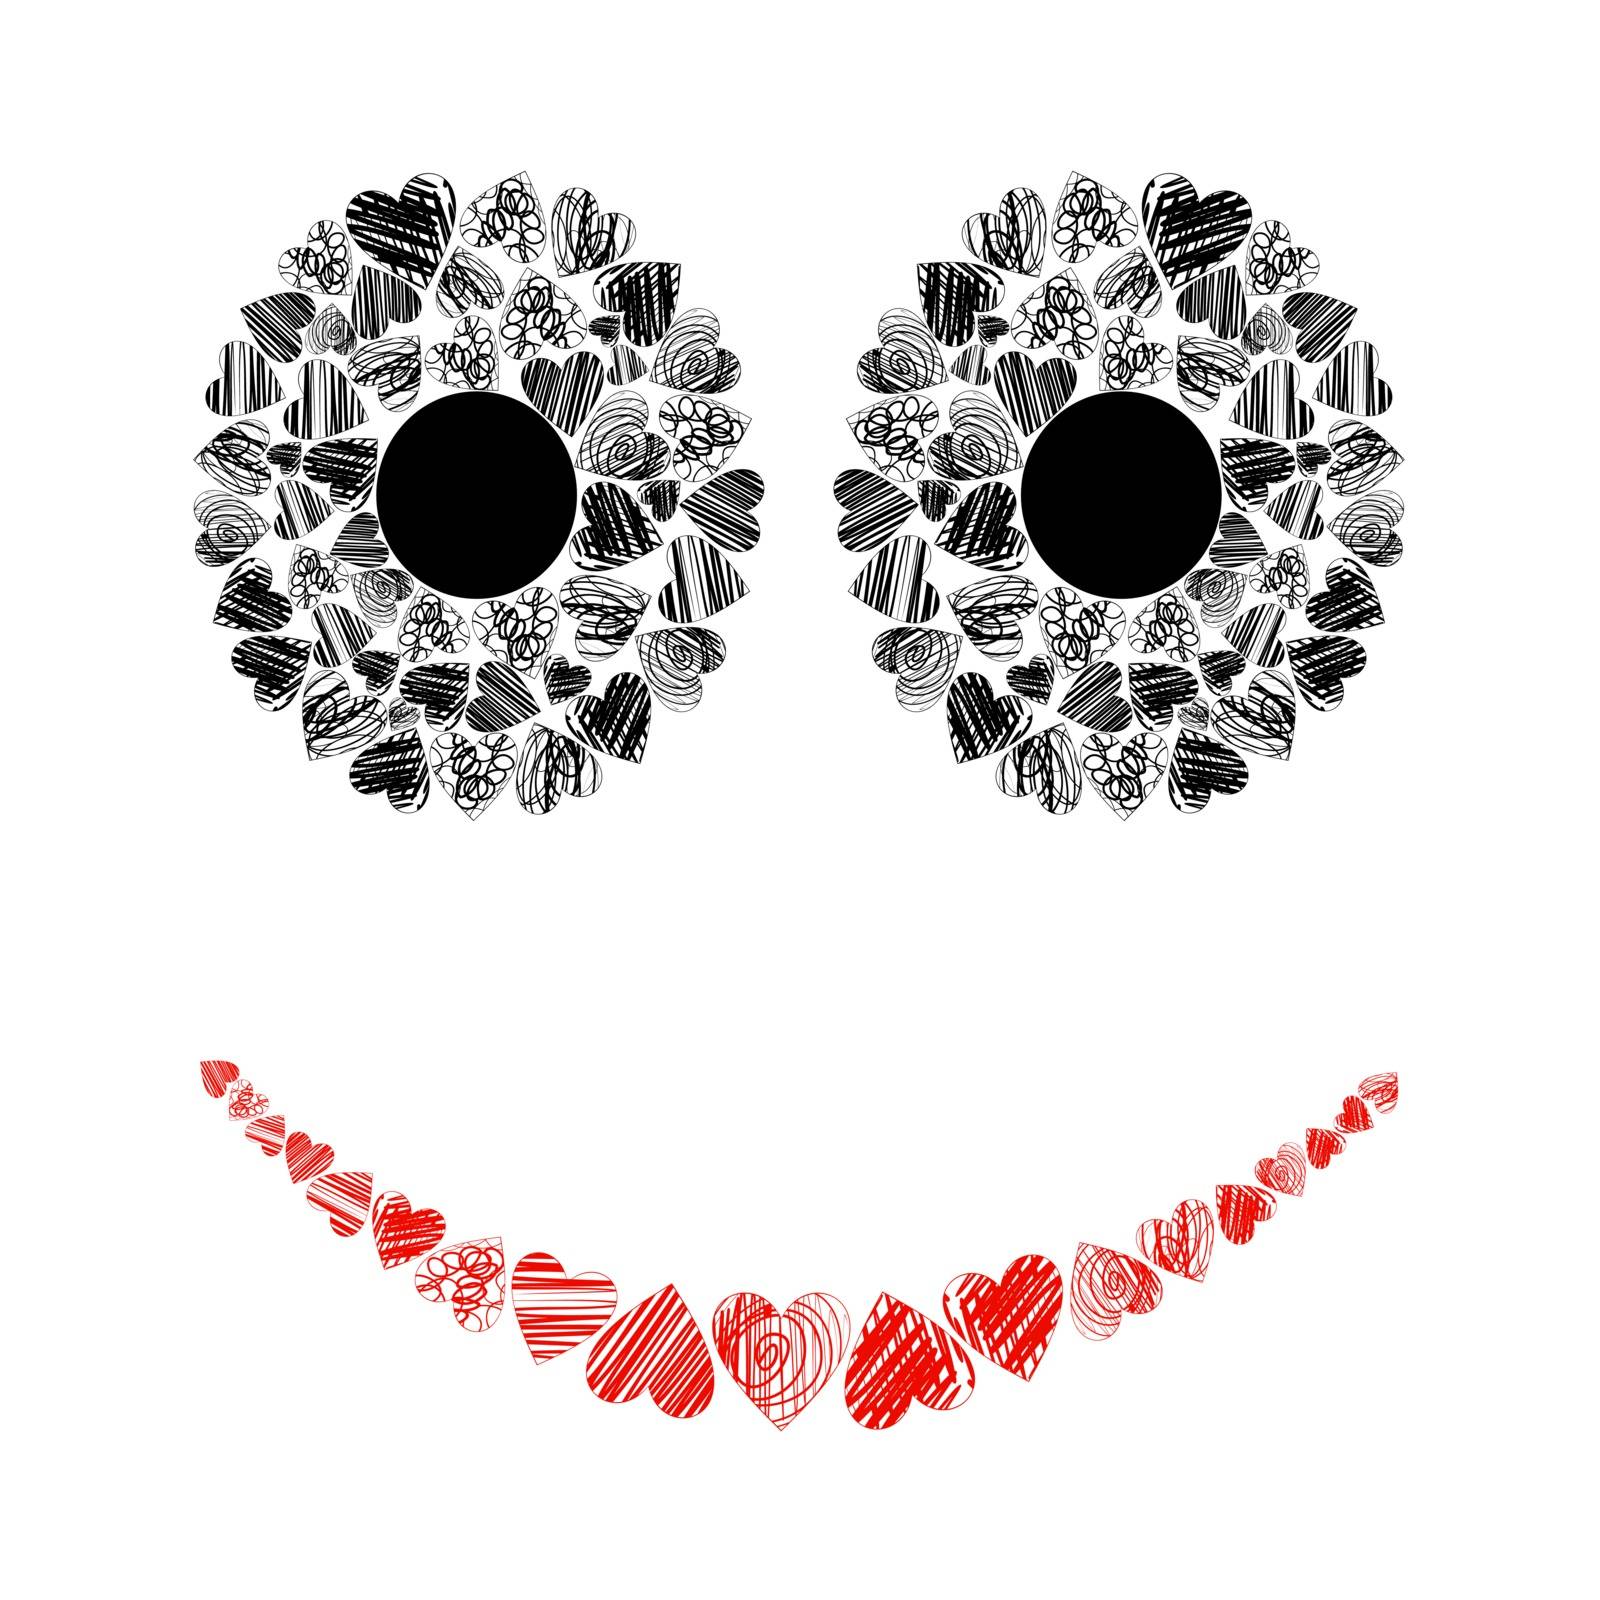 Eyes and a mouth made of hearts. A vector illustration